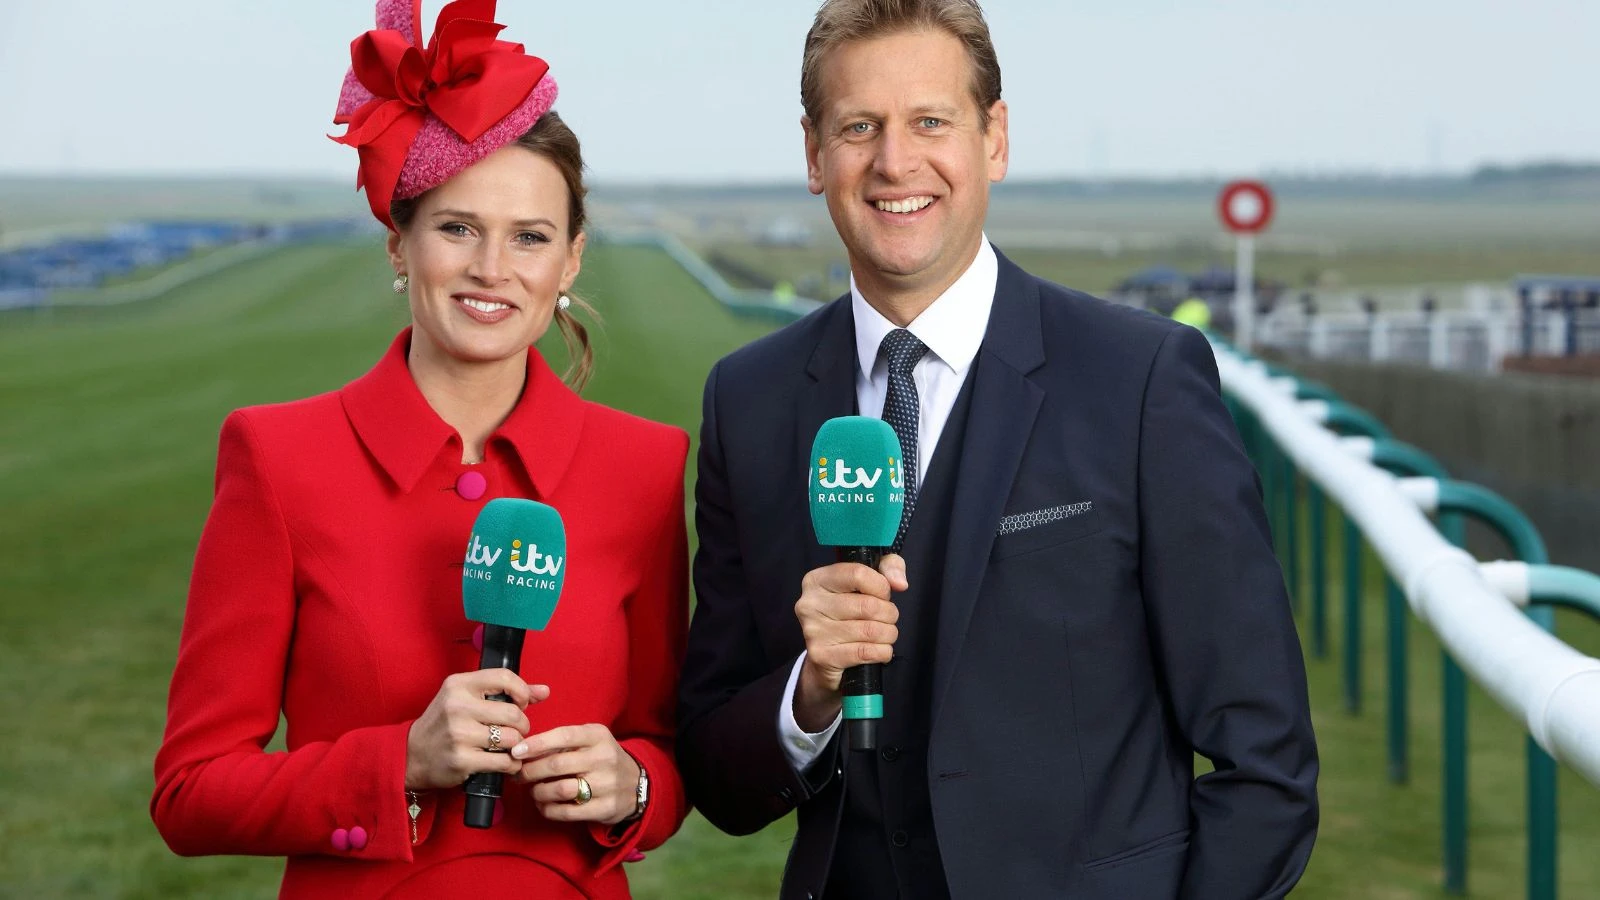 UPCOMING LIVE HORSE RACING COVERAGE ON ITV RACING